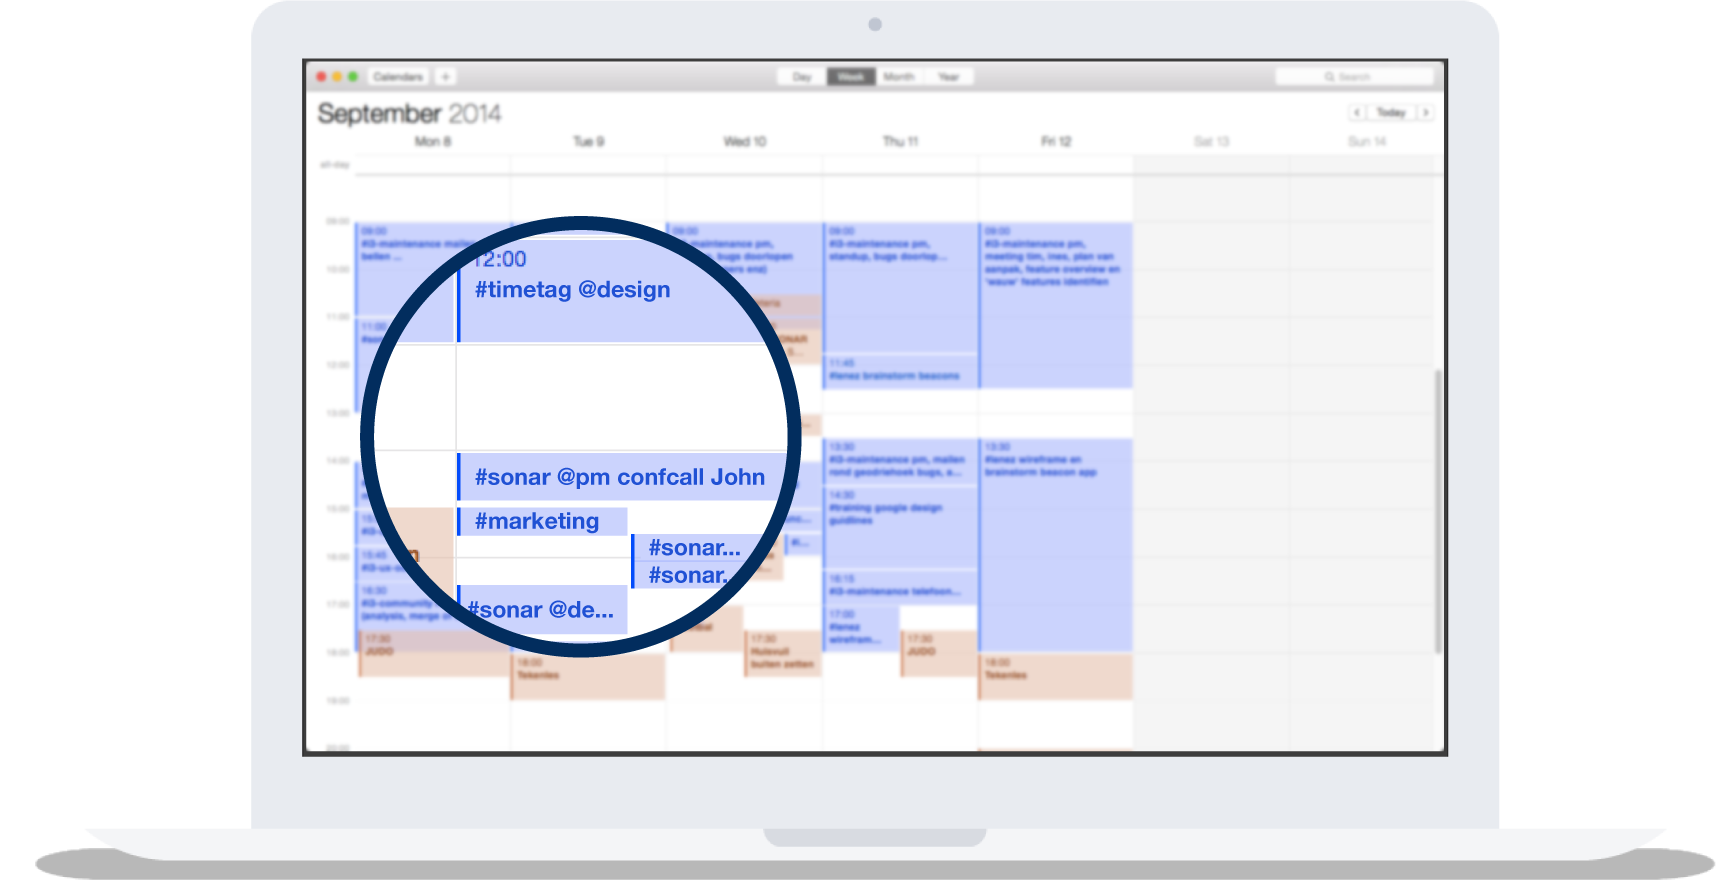 Log your time by annotating calendar events